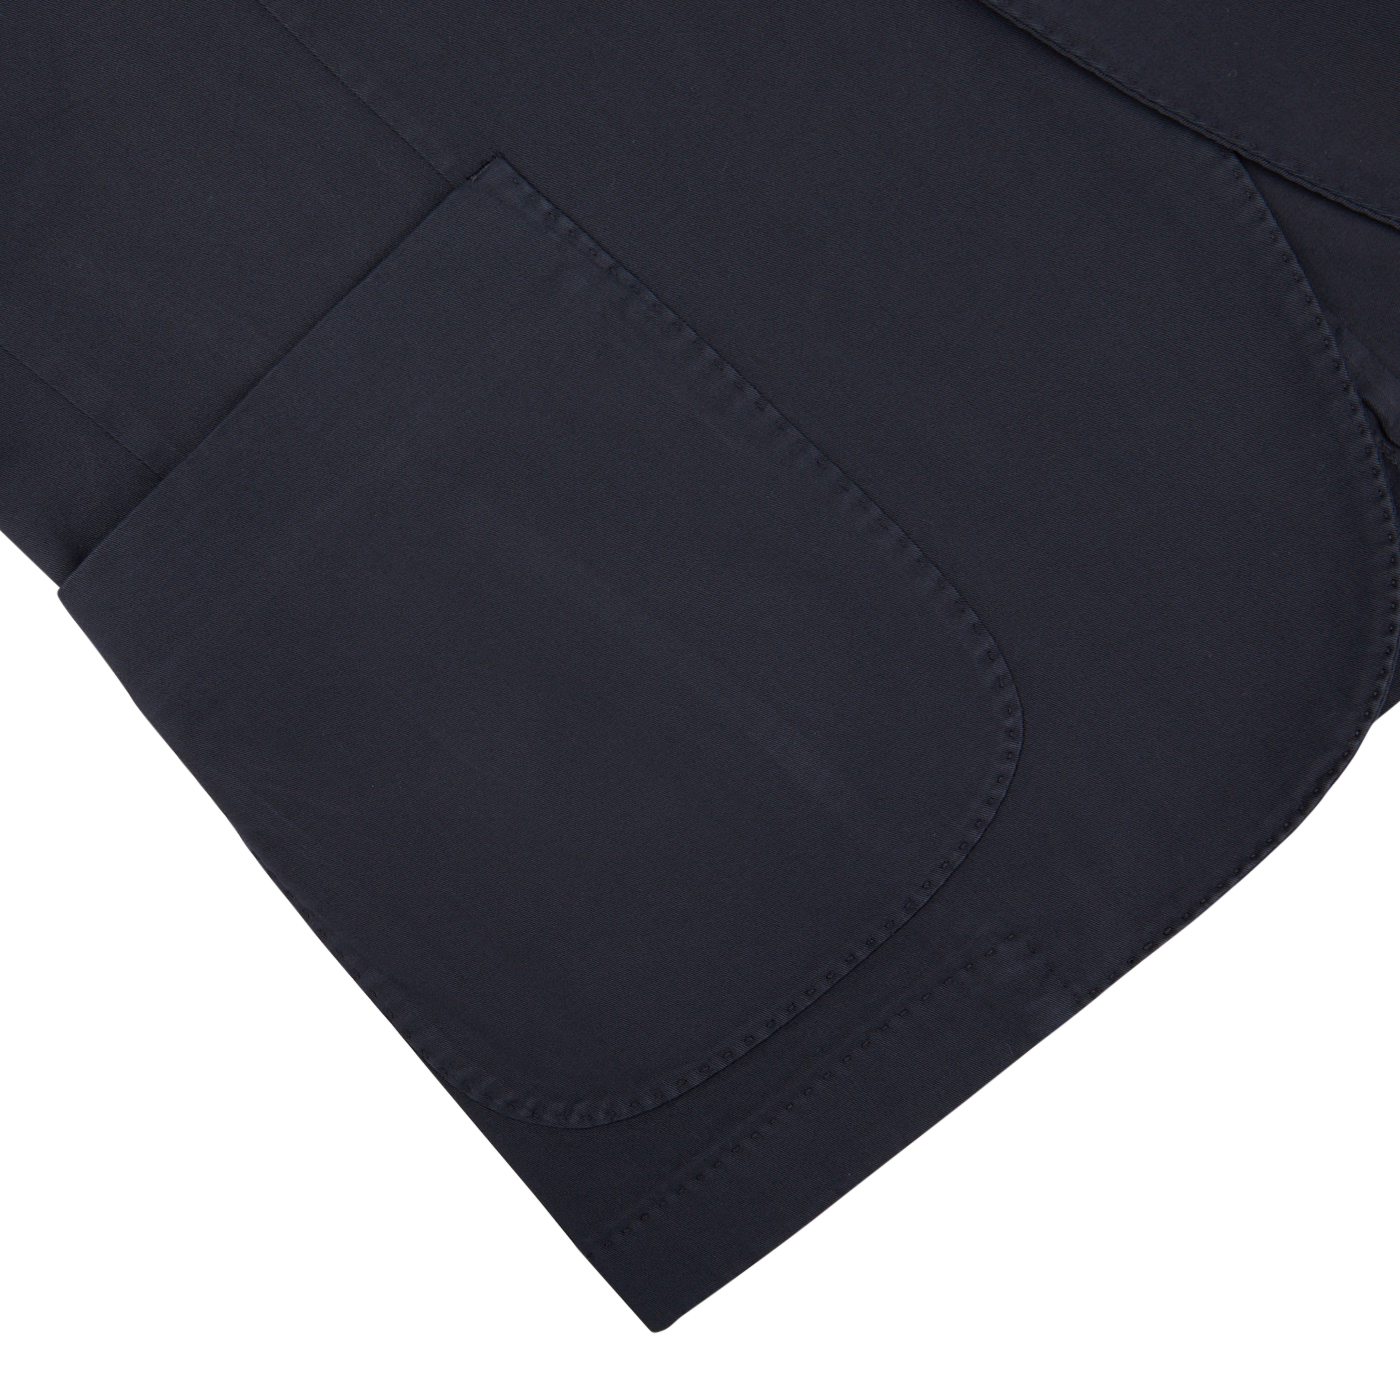 Close-up of a dark Boglioli Navy Blue Washed Cotton K Jacket fabric with a pocket detail, showcasing unstructured craftsmanship from Italy.